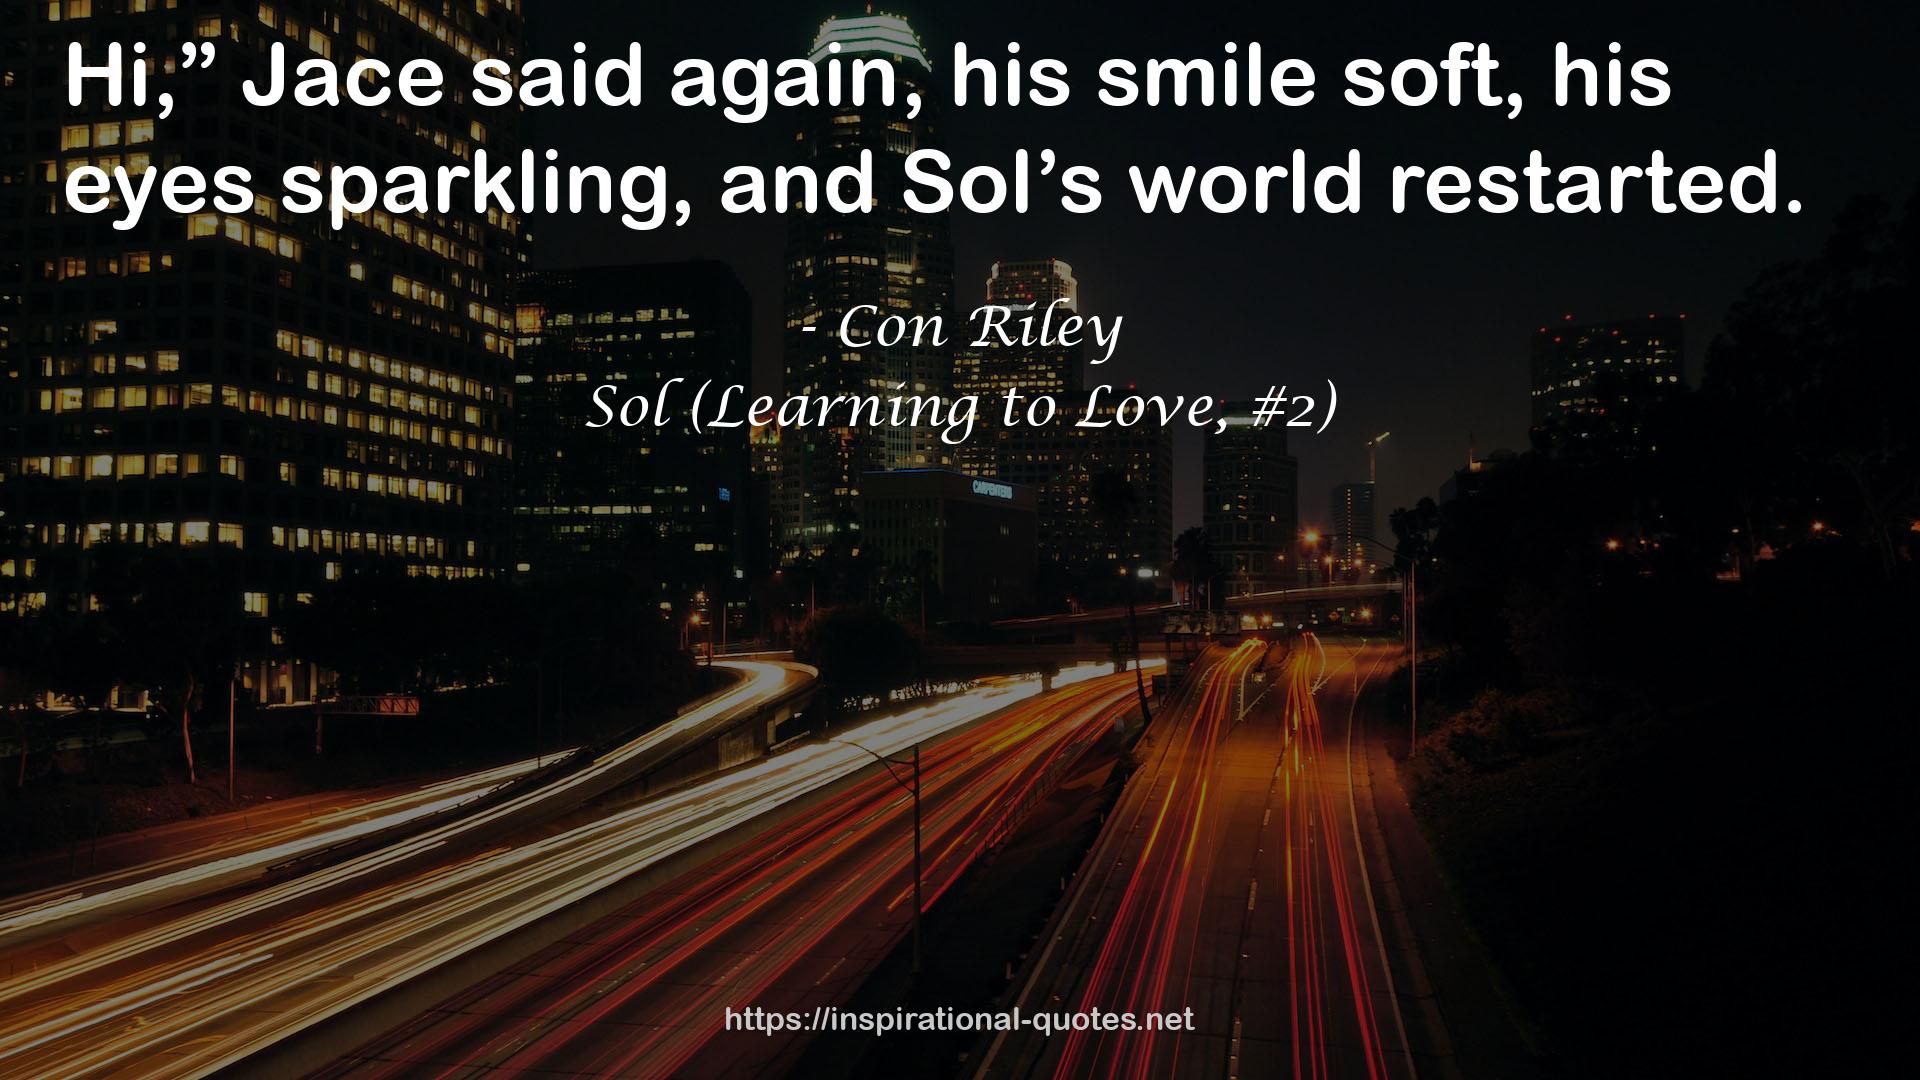 Sol (Learning to Love, #2) QUOTES